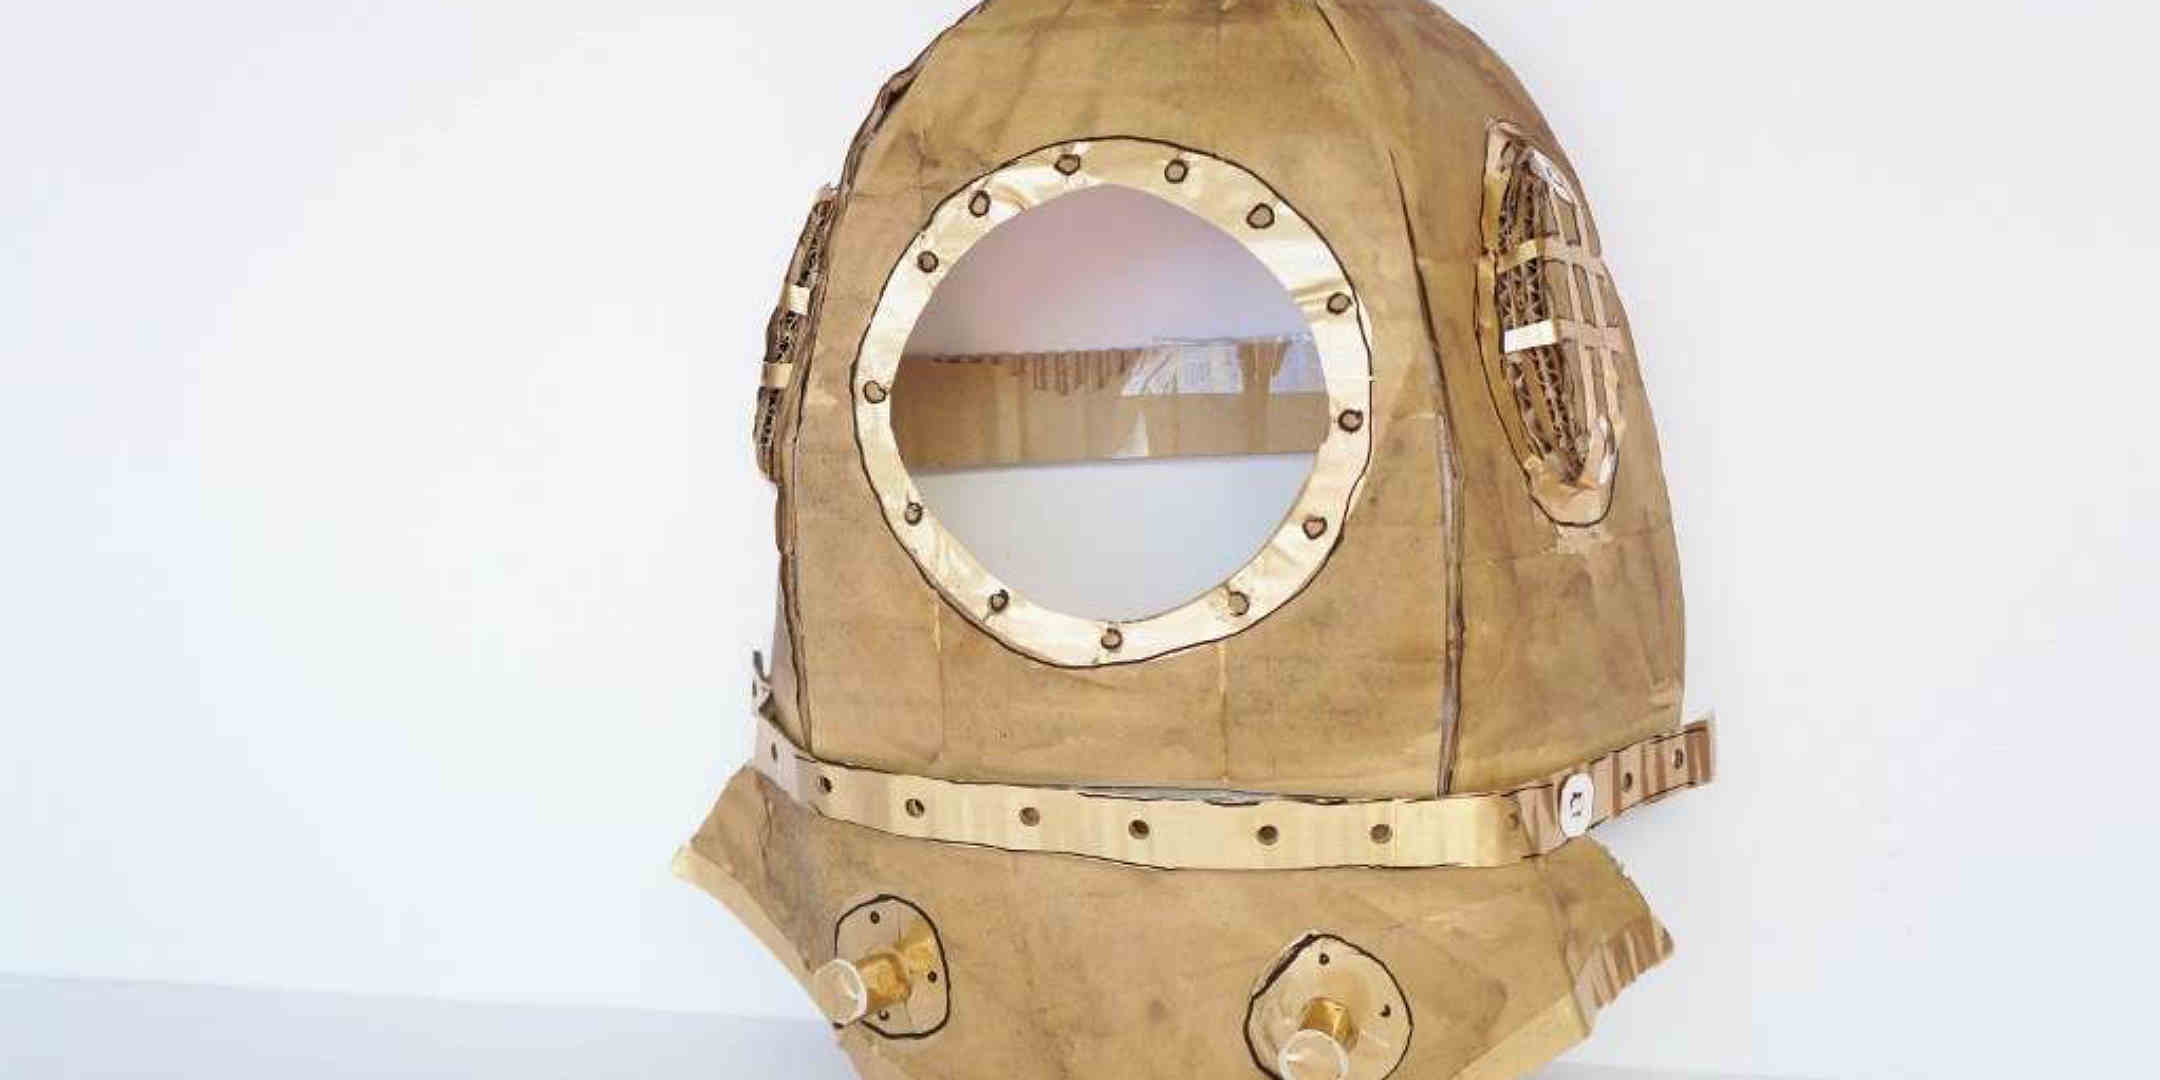 How to make an easy deep sea diver costume